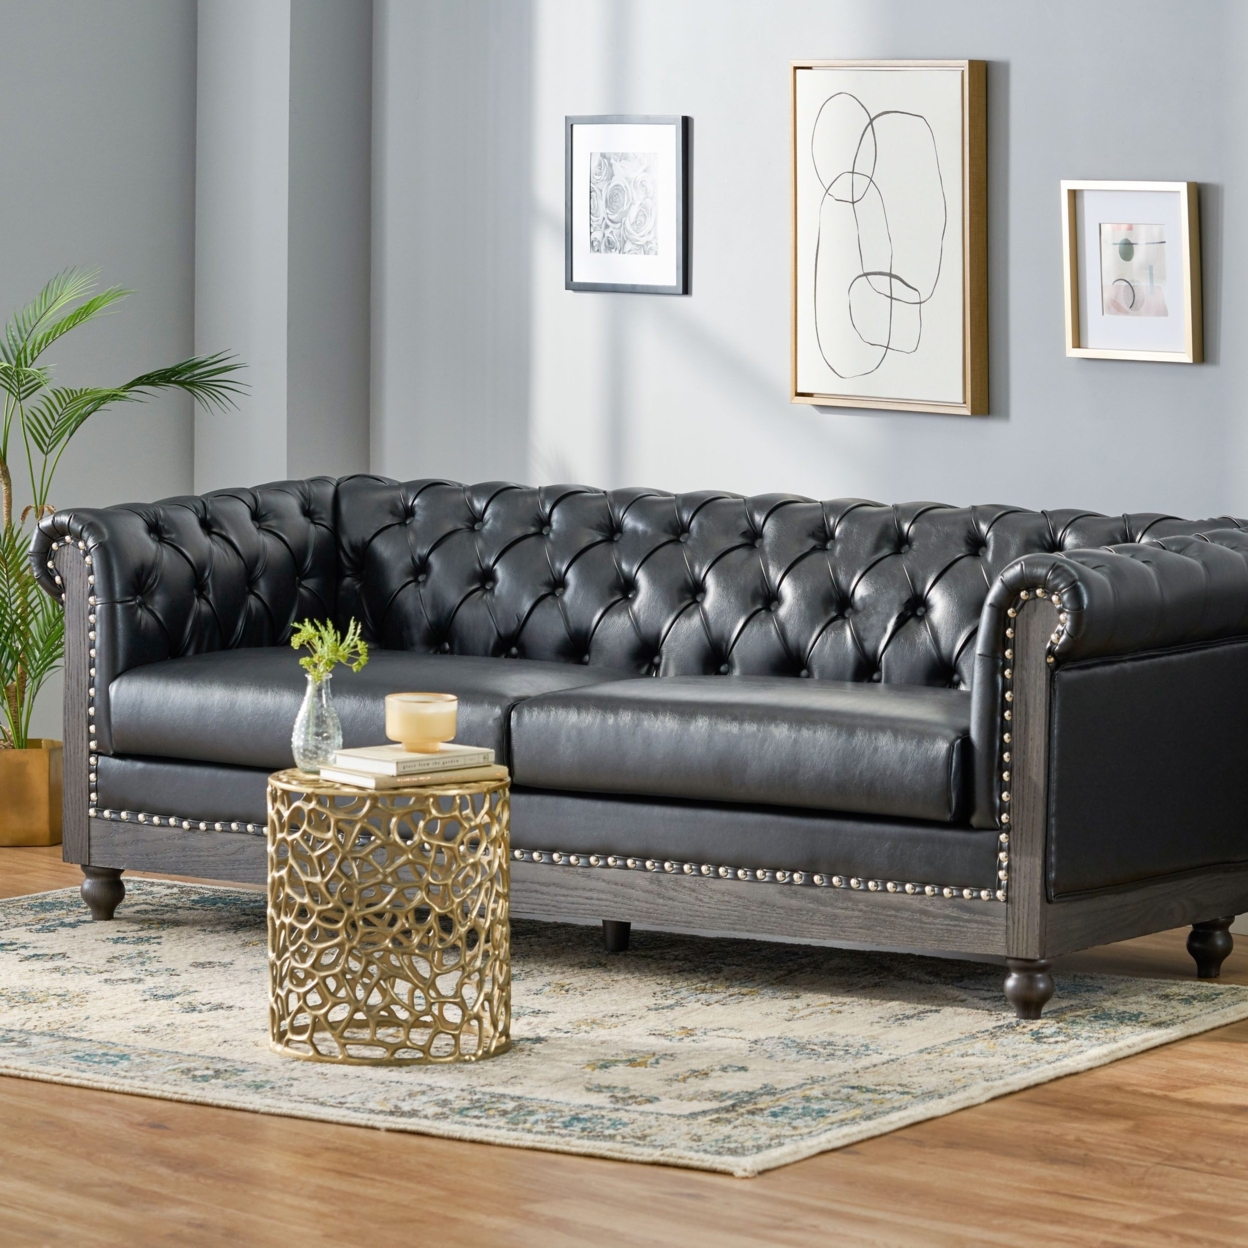 Kinzie Chesterfield Tufted 3 Seater Sofa With Nailhead Trim - Black/midnight